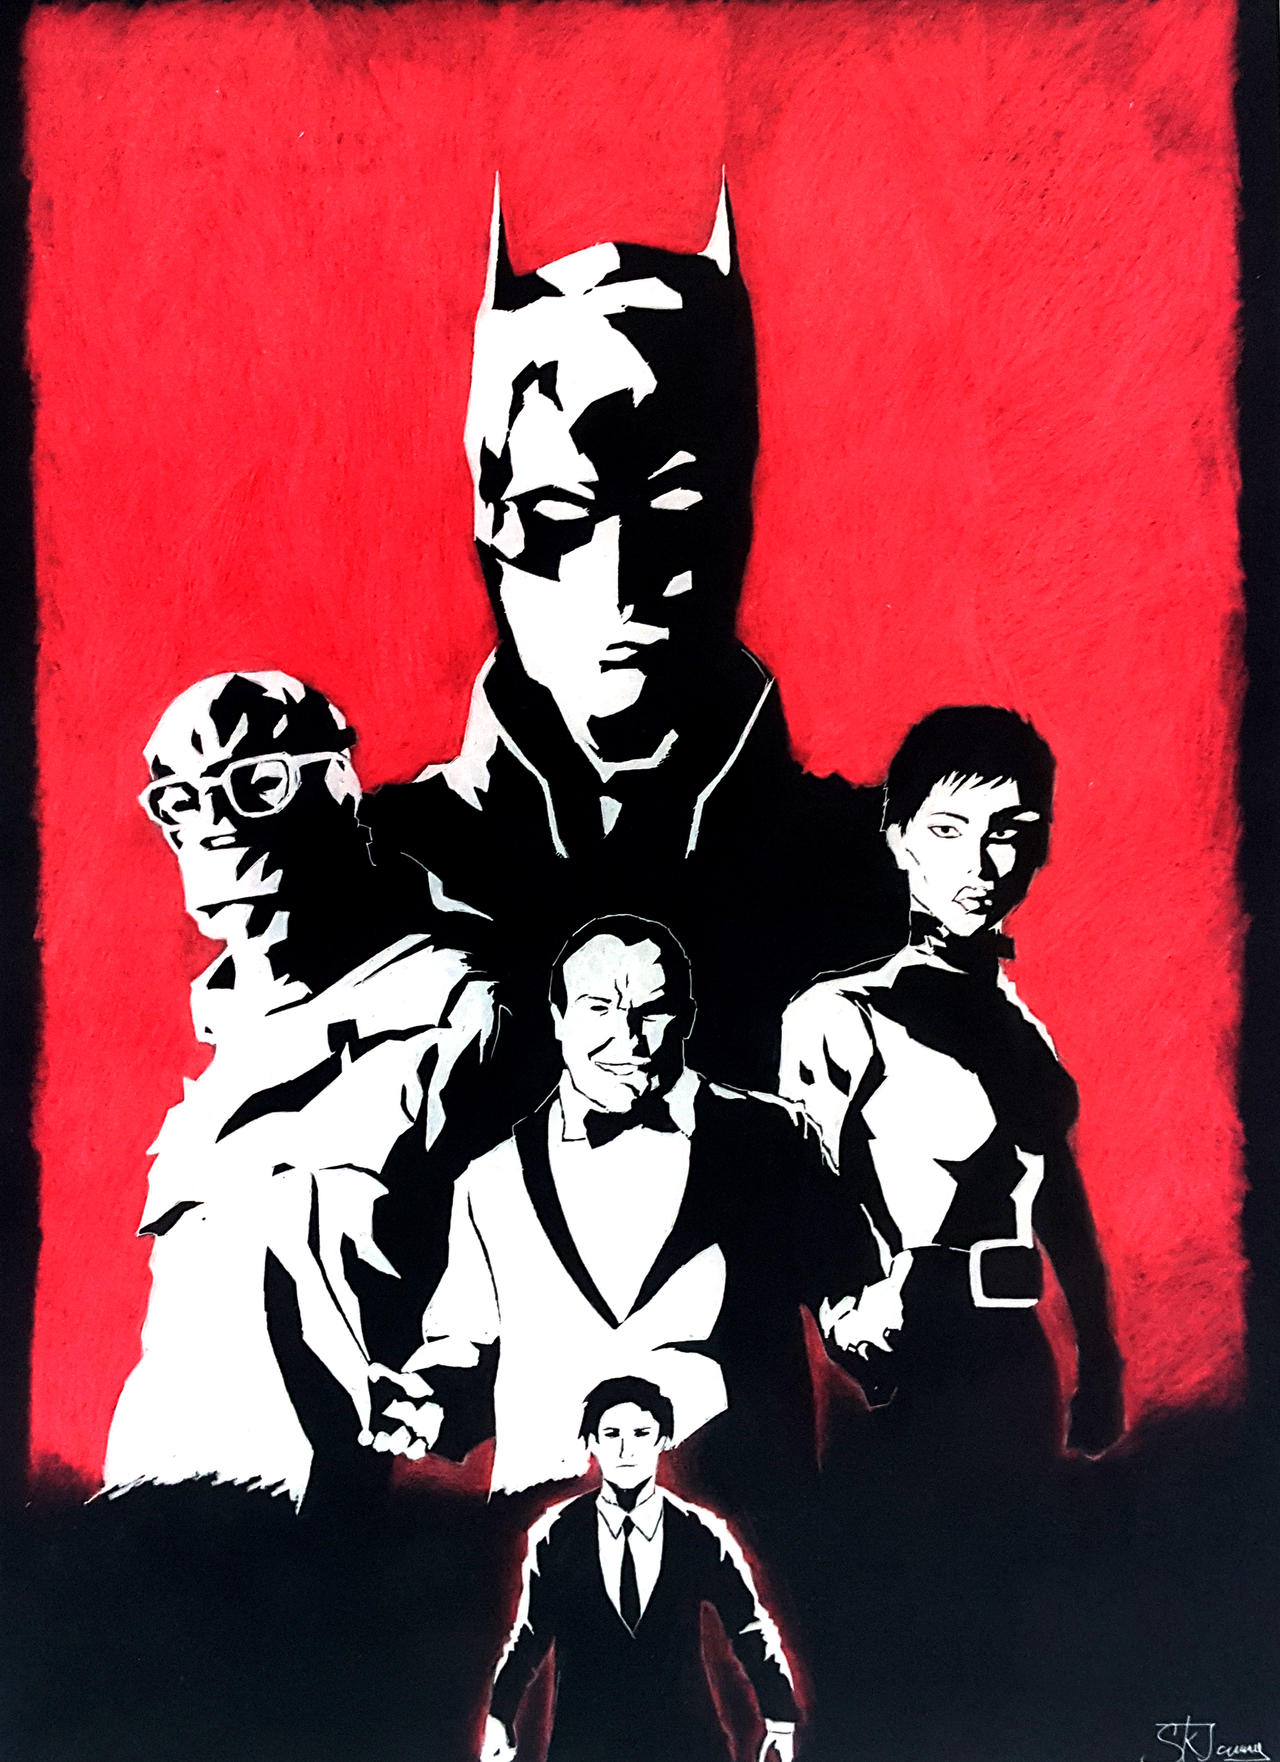 The Batman Movie Poster (Black, White and Red) by Roby10000 on DeviantArt